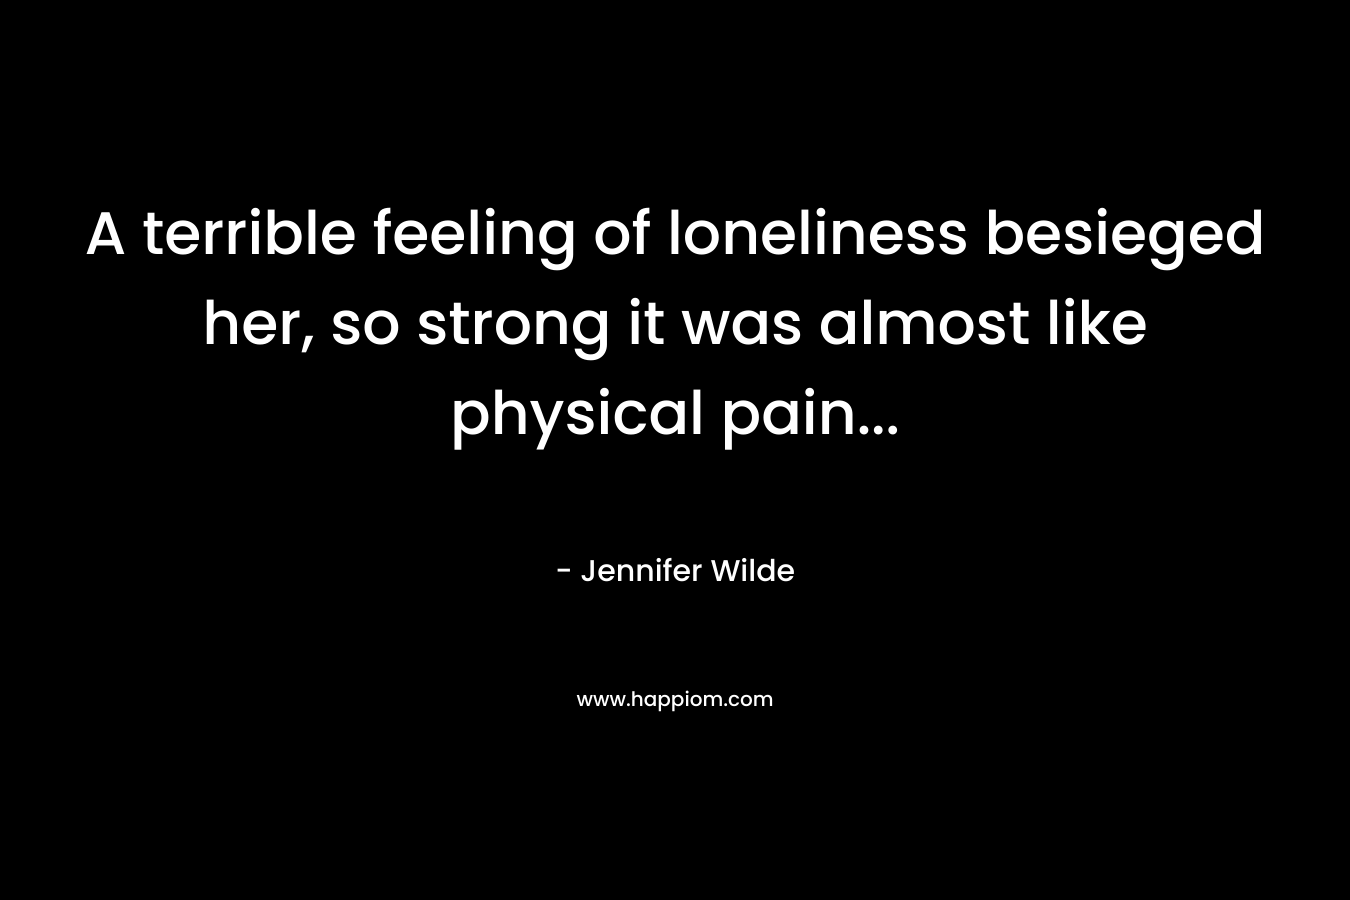 A terrible feeling of loneliness besieged her, so strong it was almost like physical pain… – Jennifer Wilde